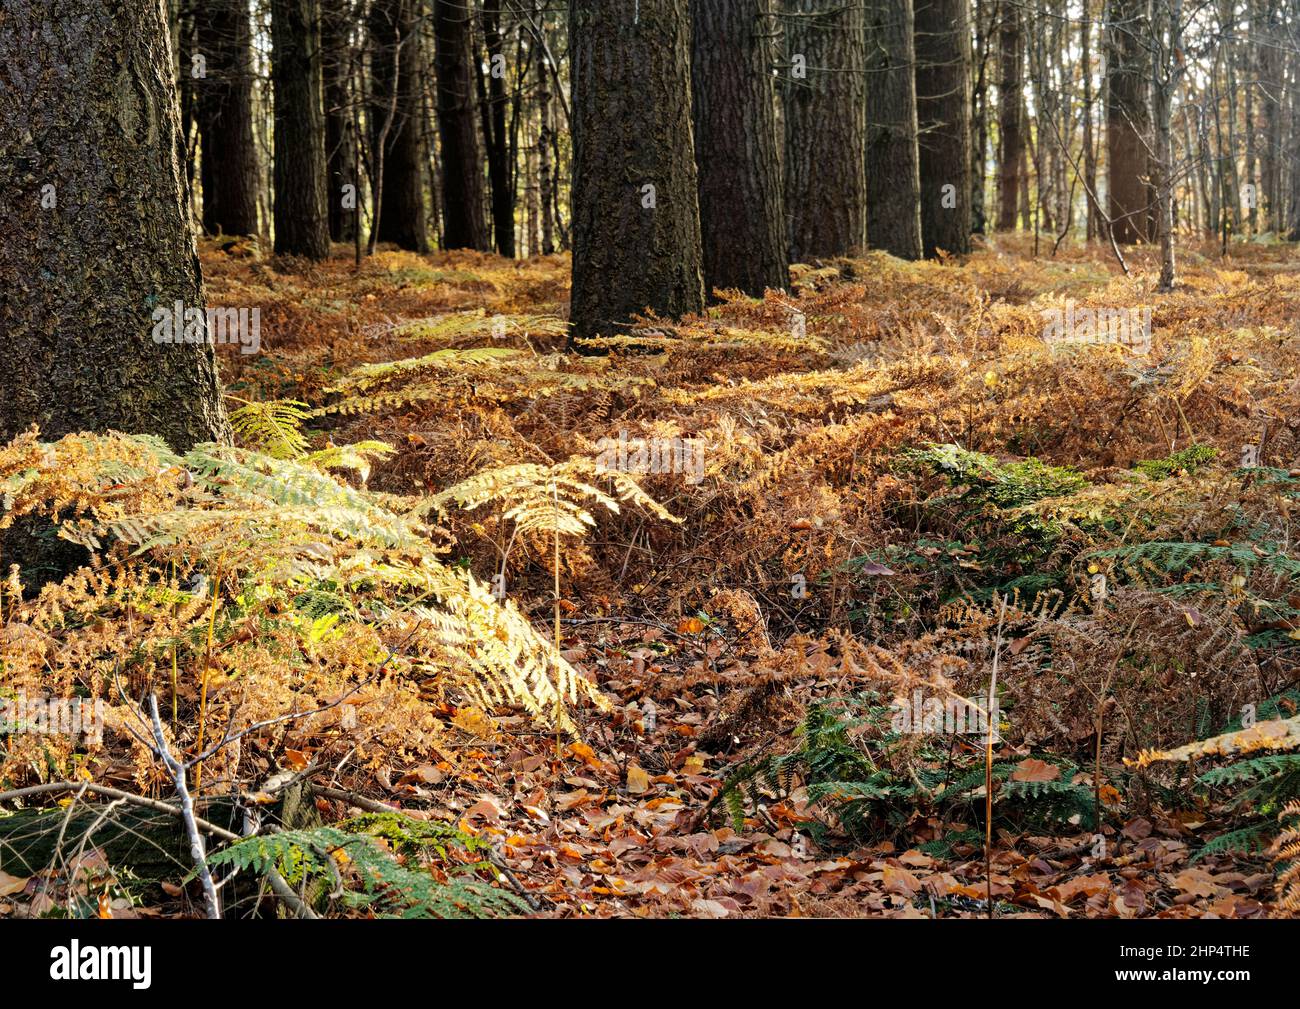 brown and dry bracken amongst pine trees in a Norfolk Woodland. Stock Photo